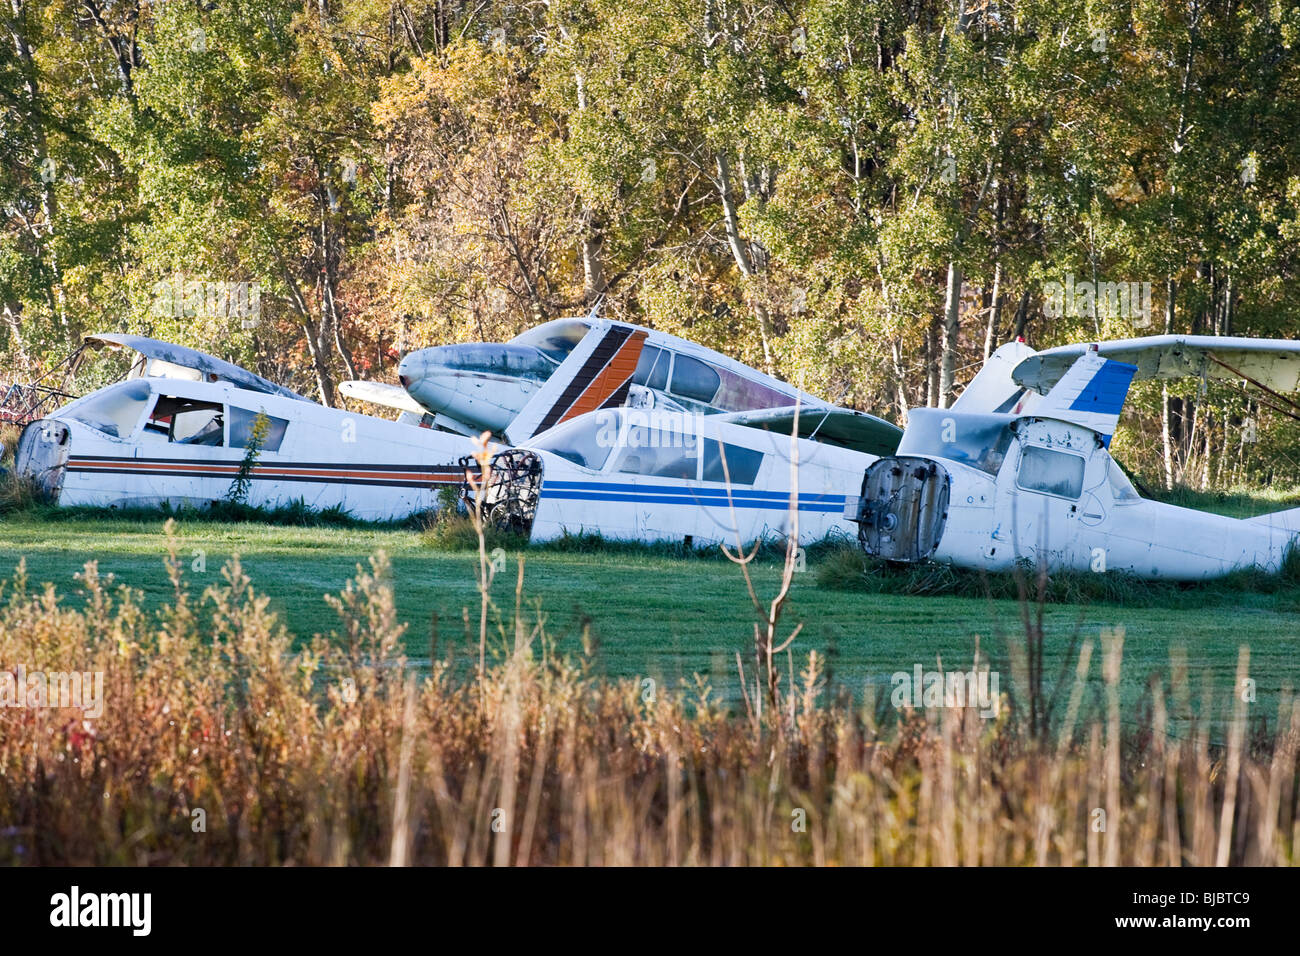 A plan graveyard in the country, showing many pieces of old prop planes in a field. Stock Photo